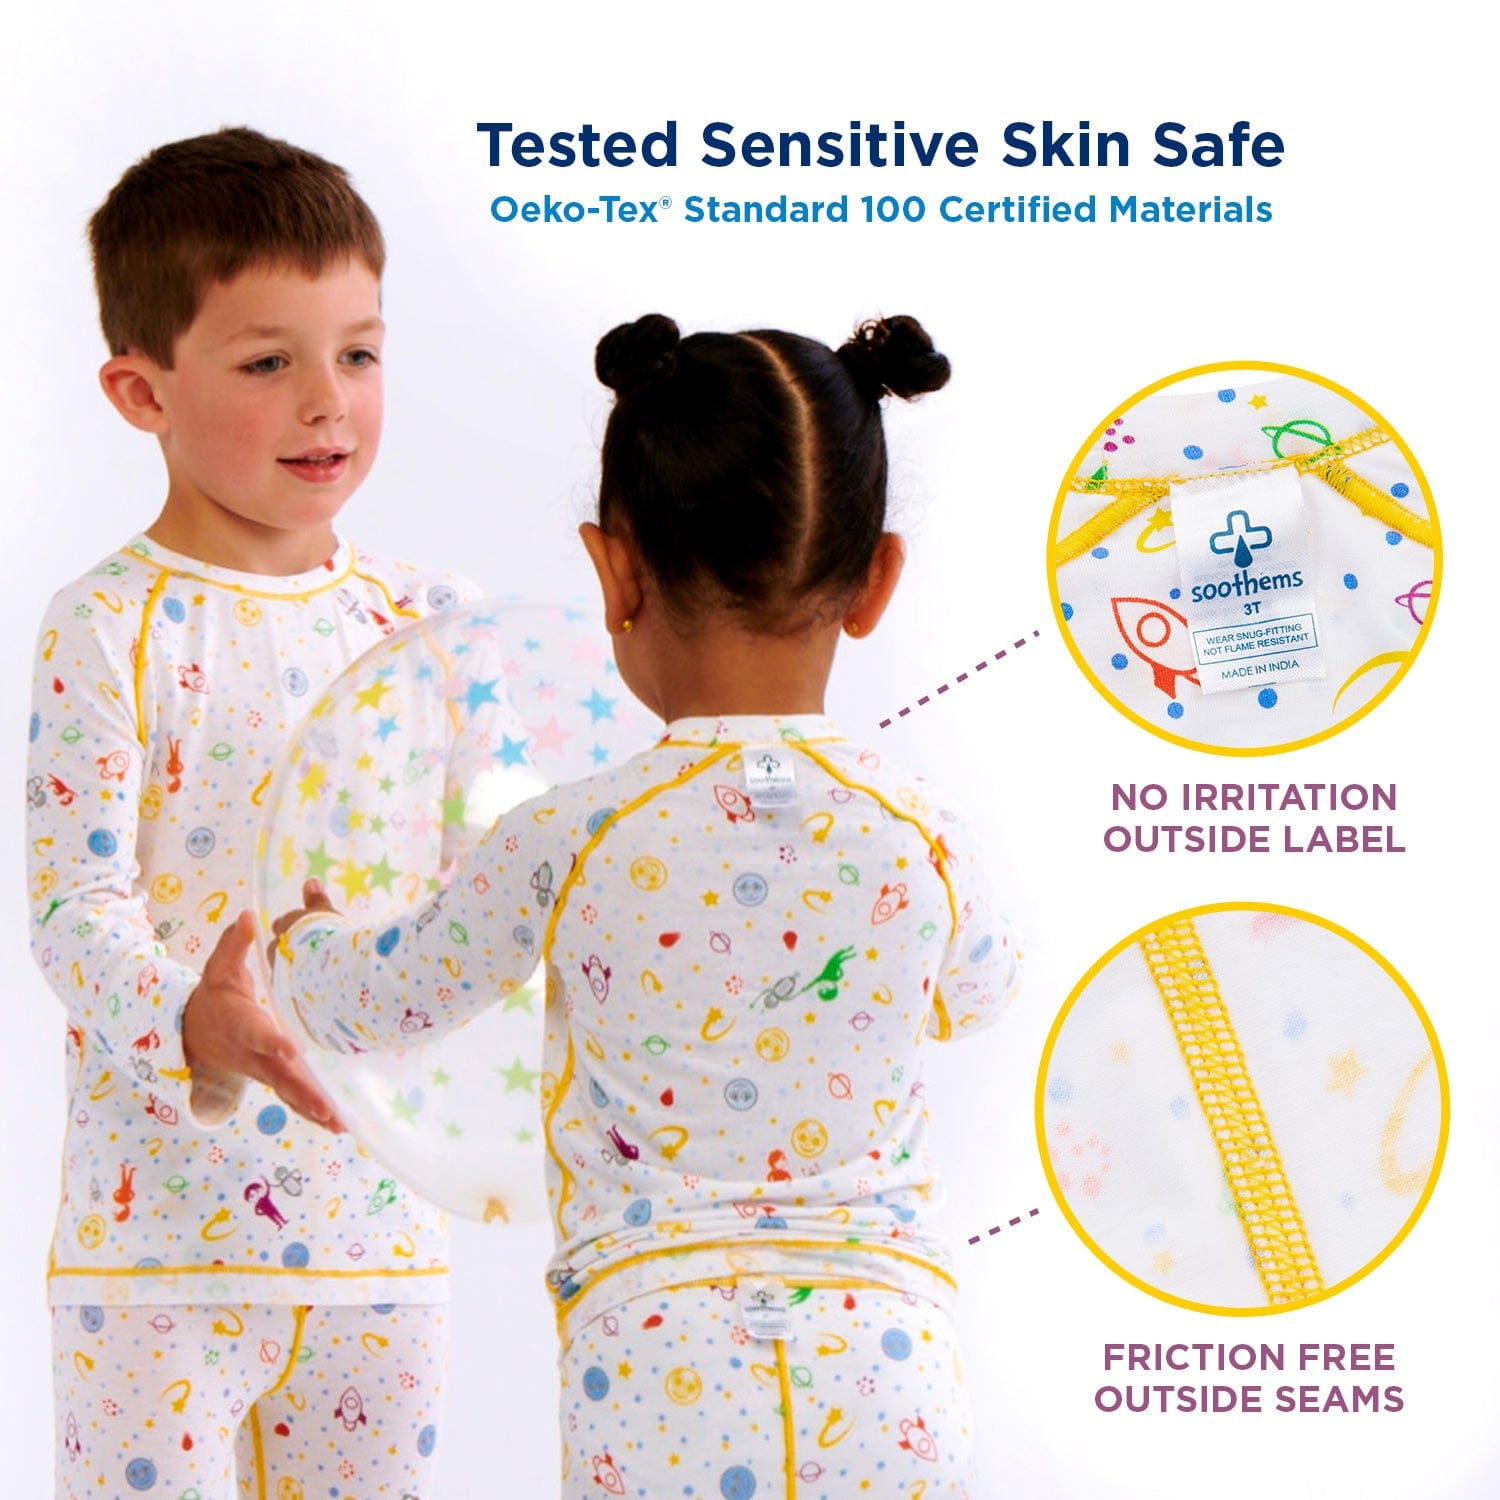 “Eczema Sleepwear Shirt for children made from TENCEL with irritation free seams for boy and girls with Sensitive Skin and Sensory Disorder”